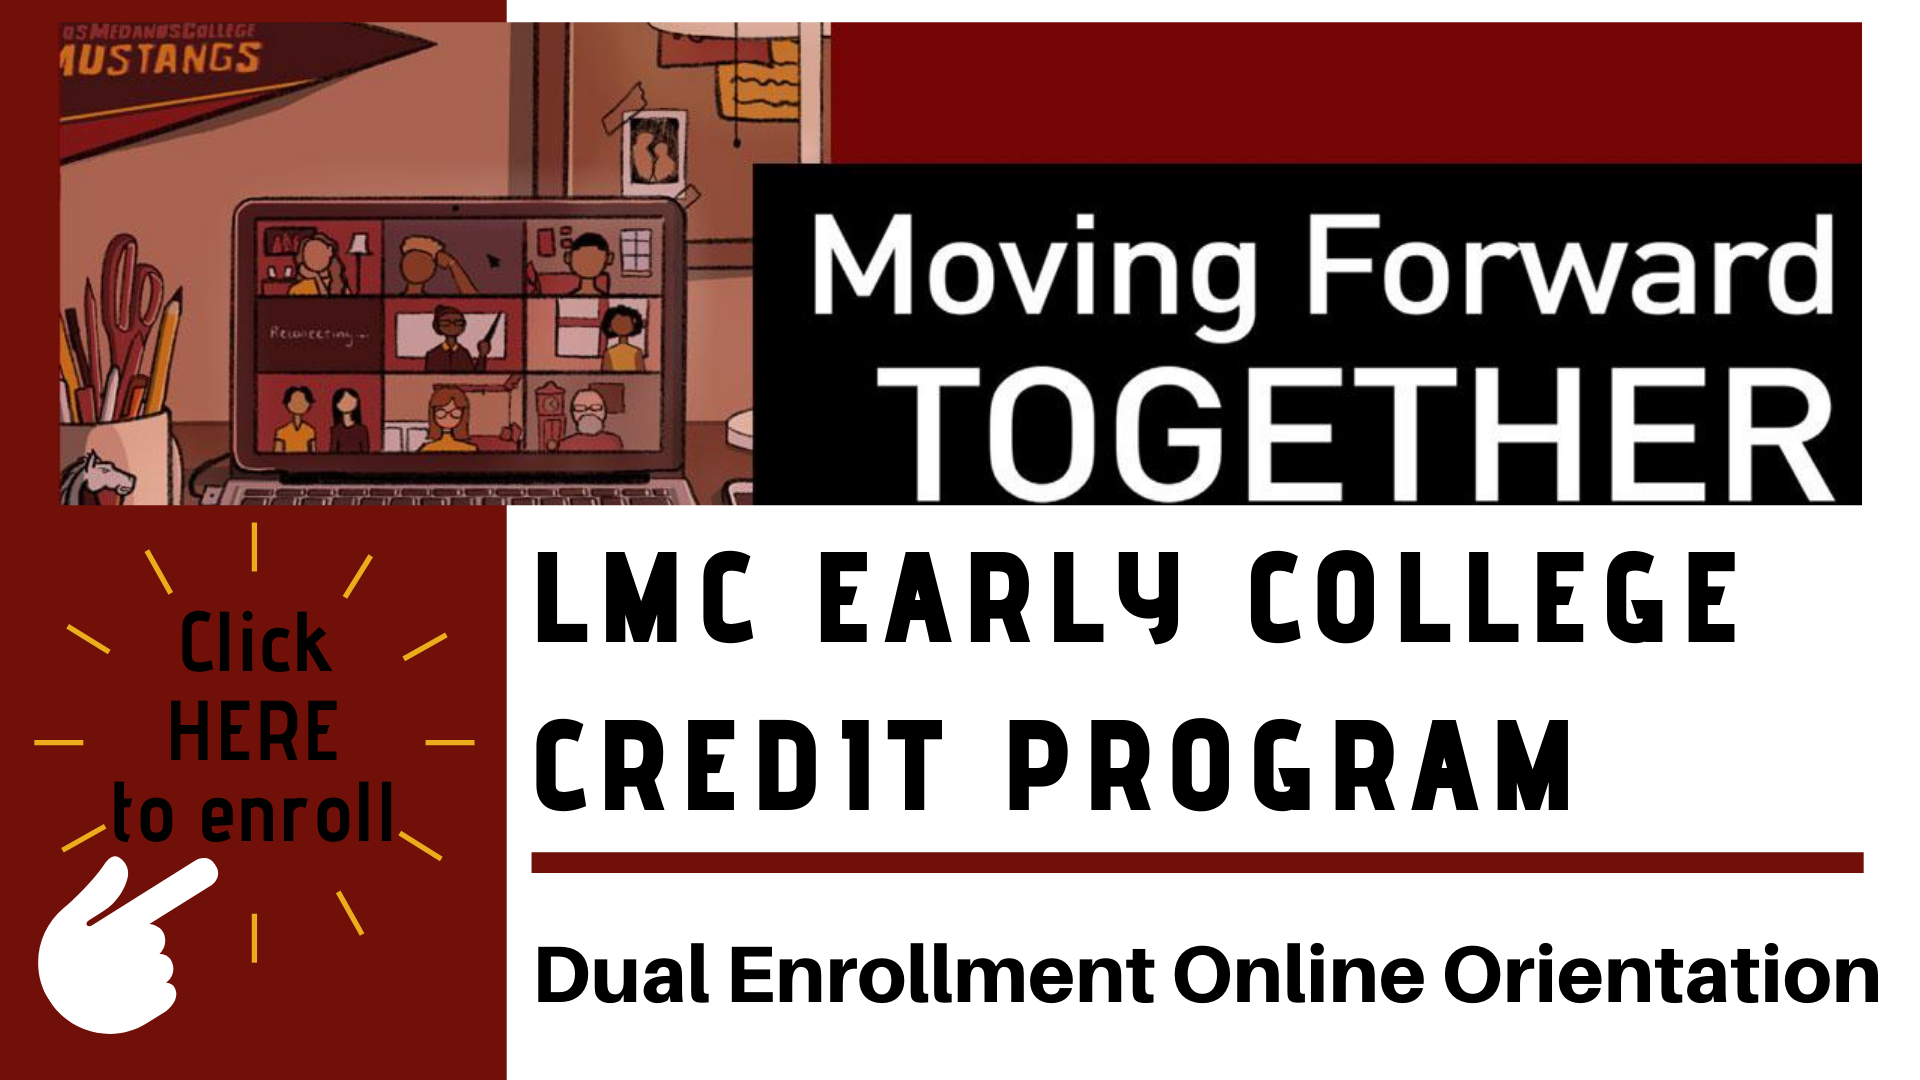 click here to enroll in the LMC DE Online Orientation